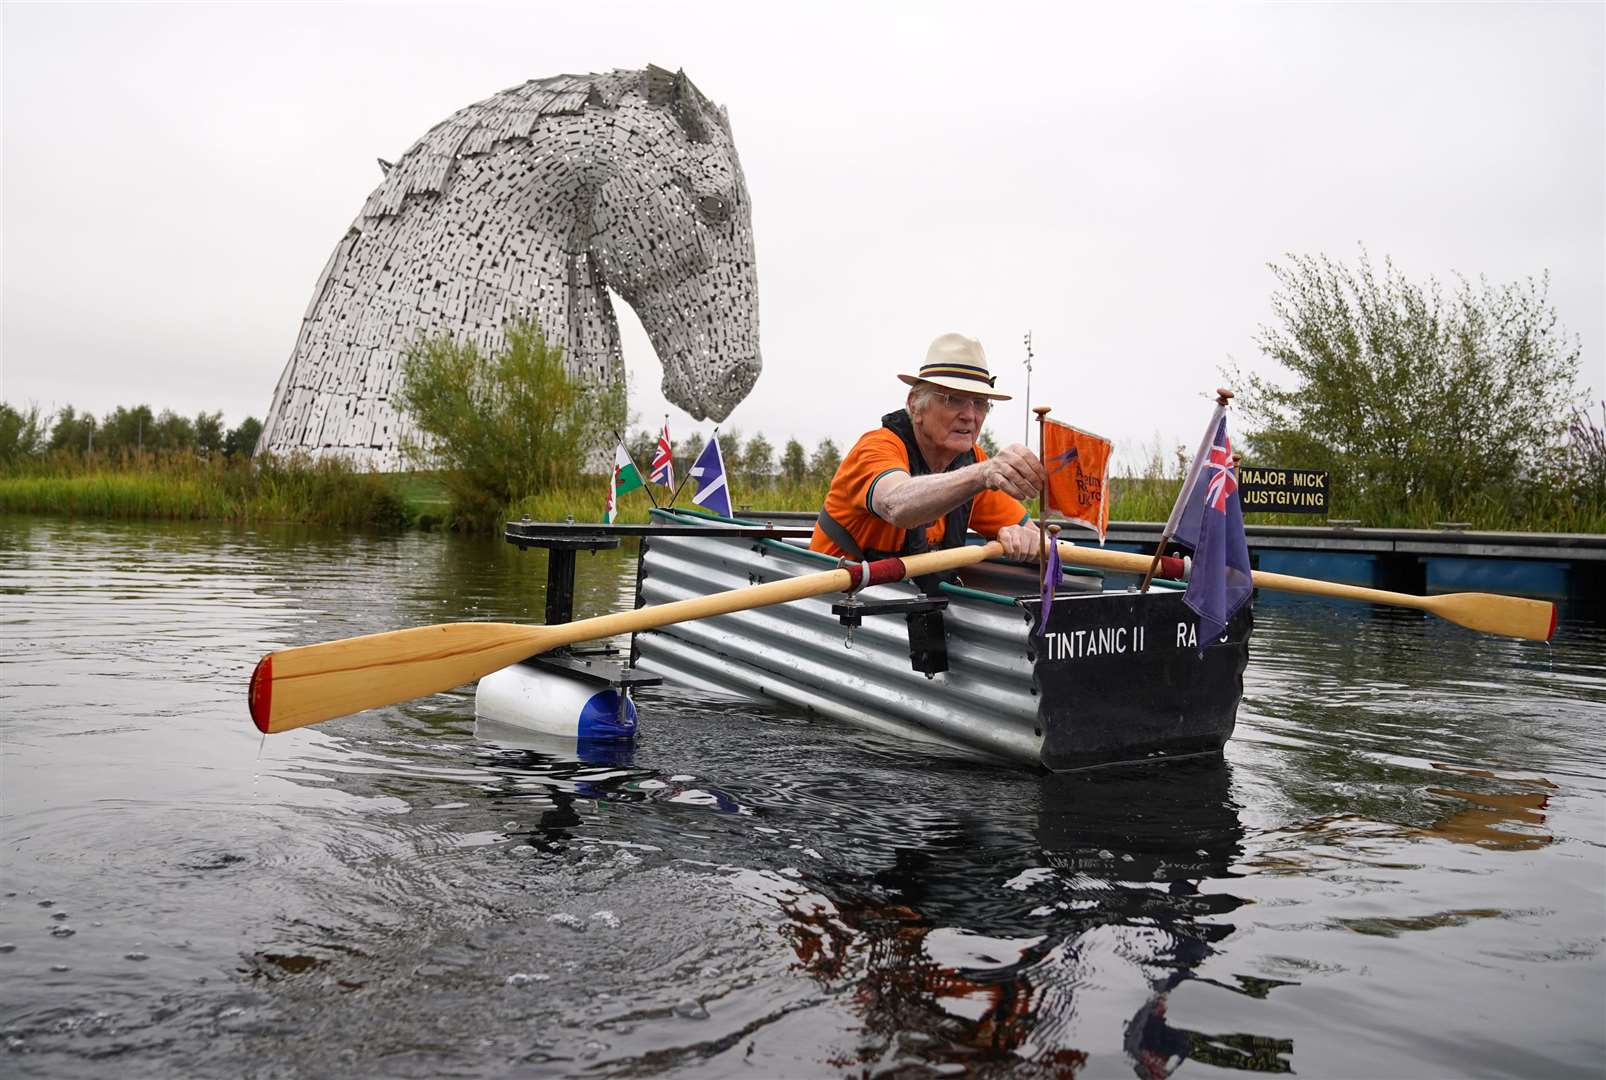 Retired Army major ‘Major Mick’ Michael Stanley rows Tintanic II along the Forth and Clyde Canal as part of his fundraising challenge (Andrew Milligan/PA)